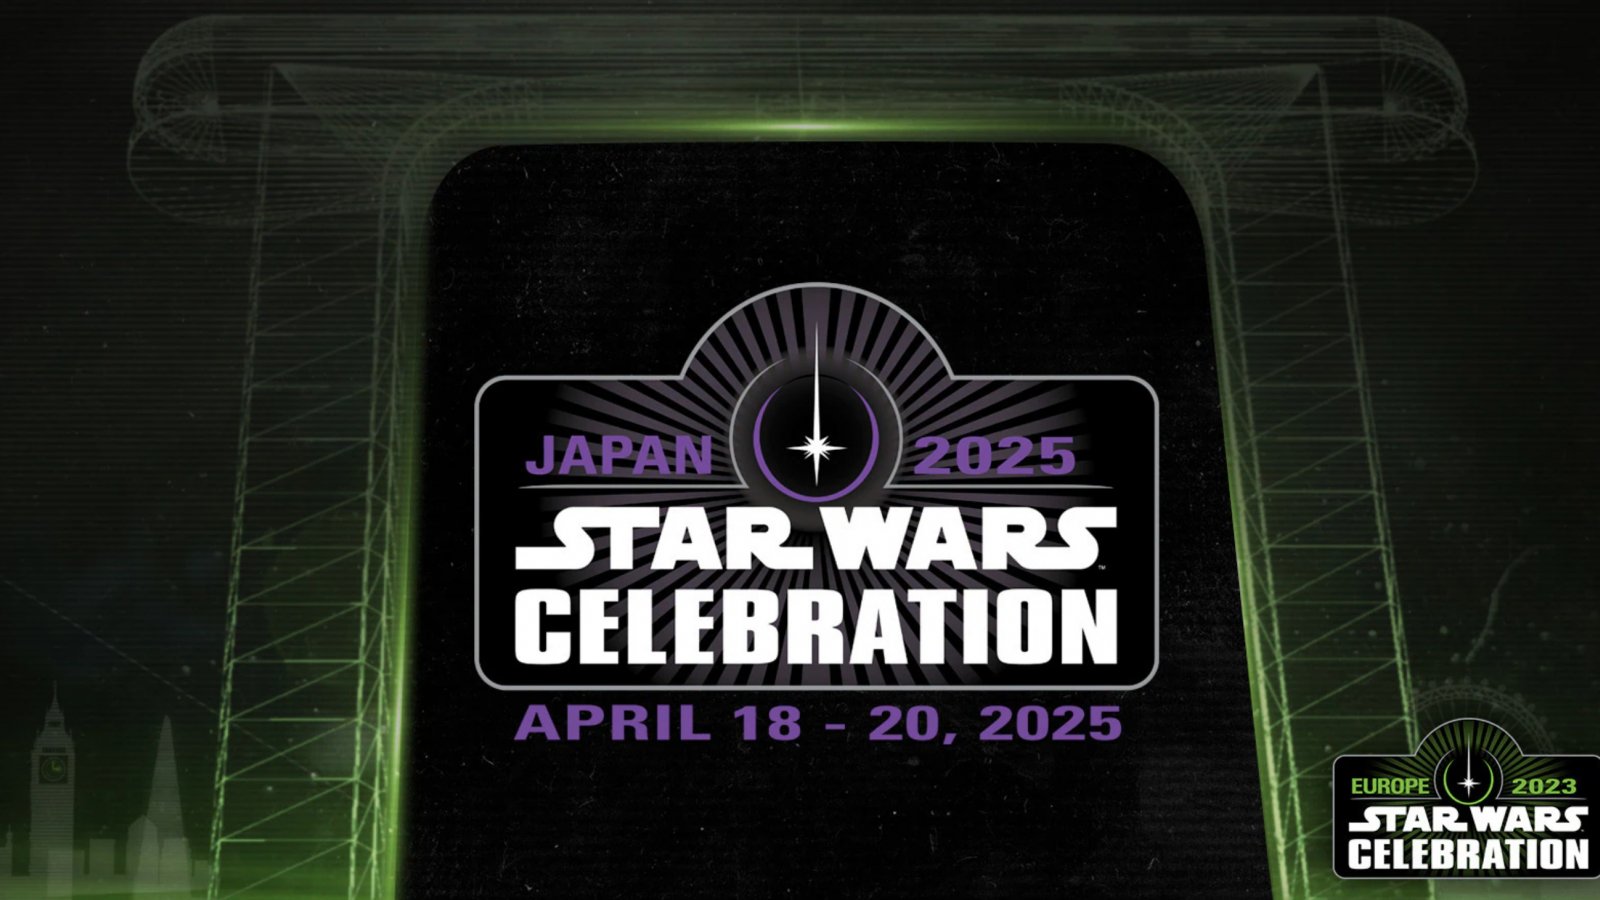 Star Wars Celebration: 2025 edition will be held in Japan